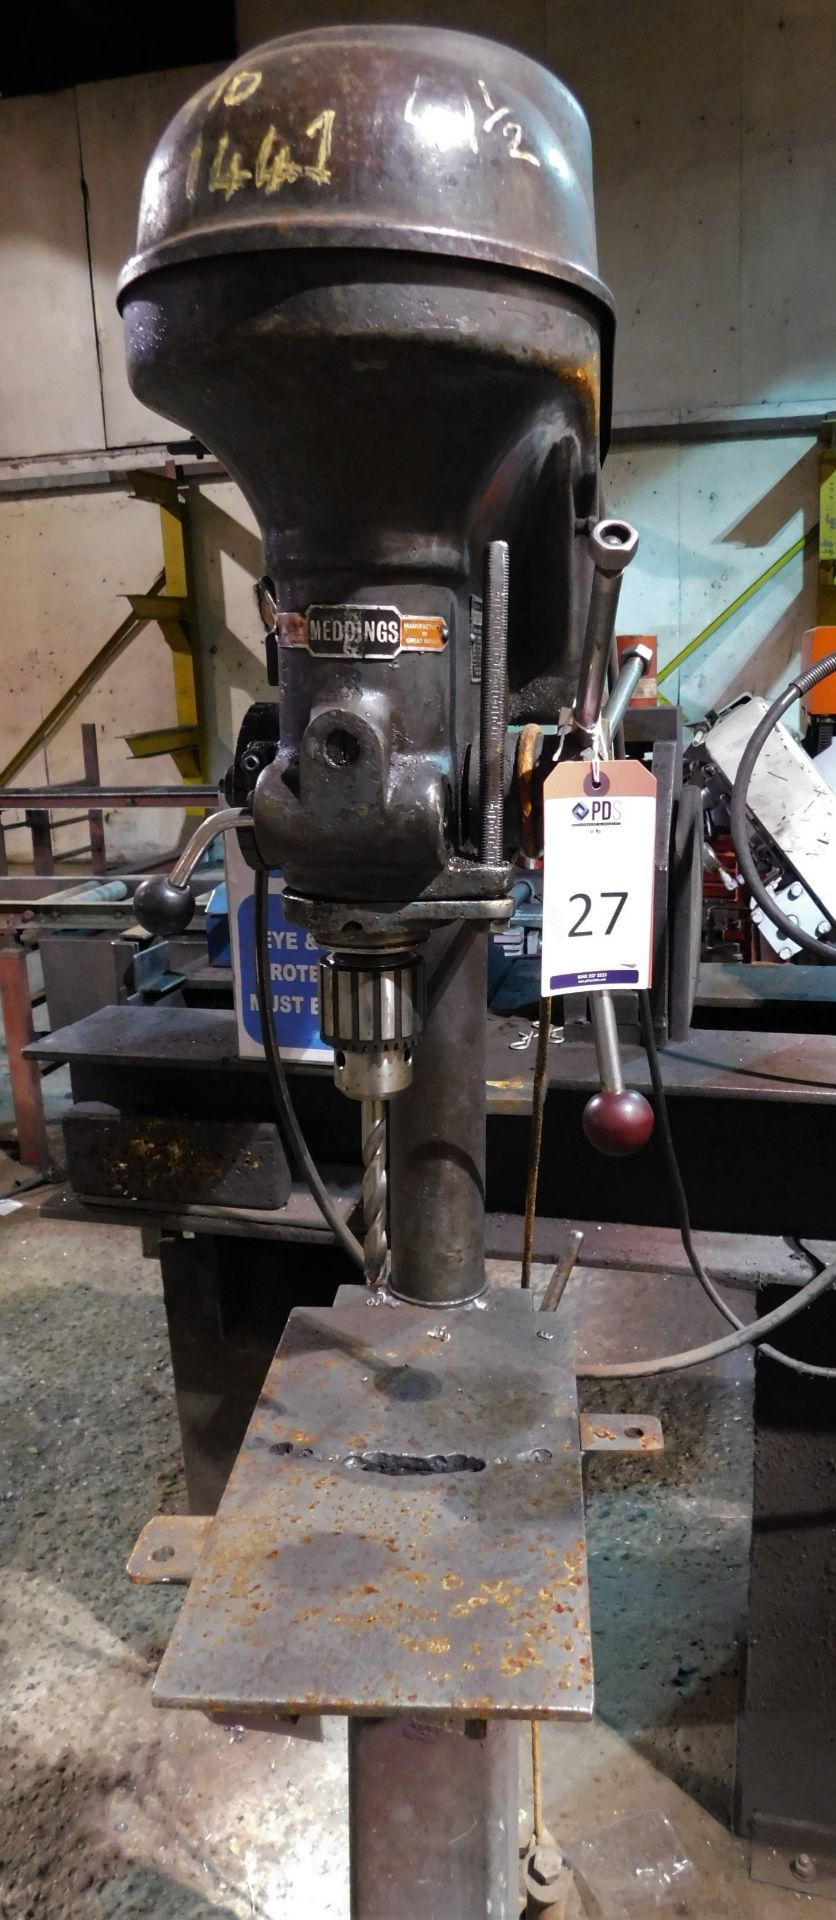 Meddings Pedestal Drill, Serial Number B4P78467 (Location: Finedon - Please Refer to General Notes)